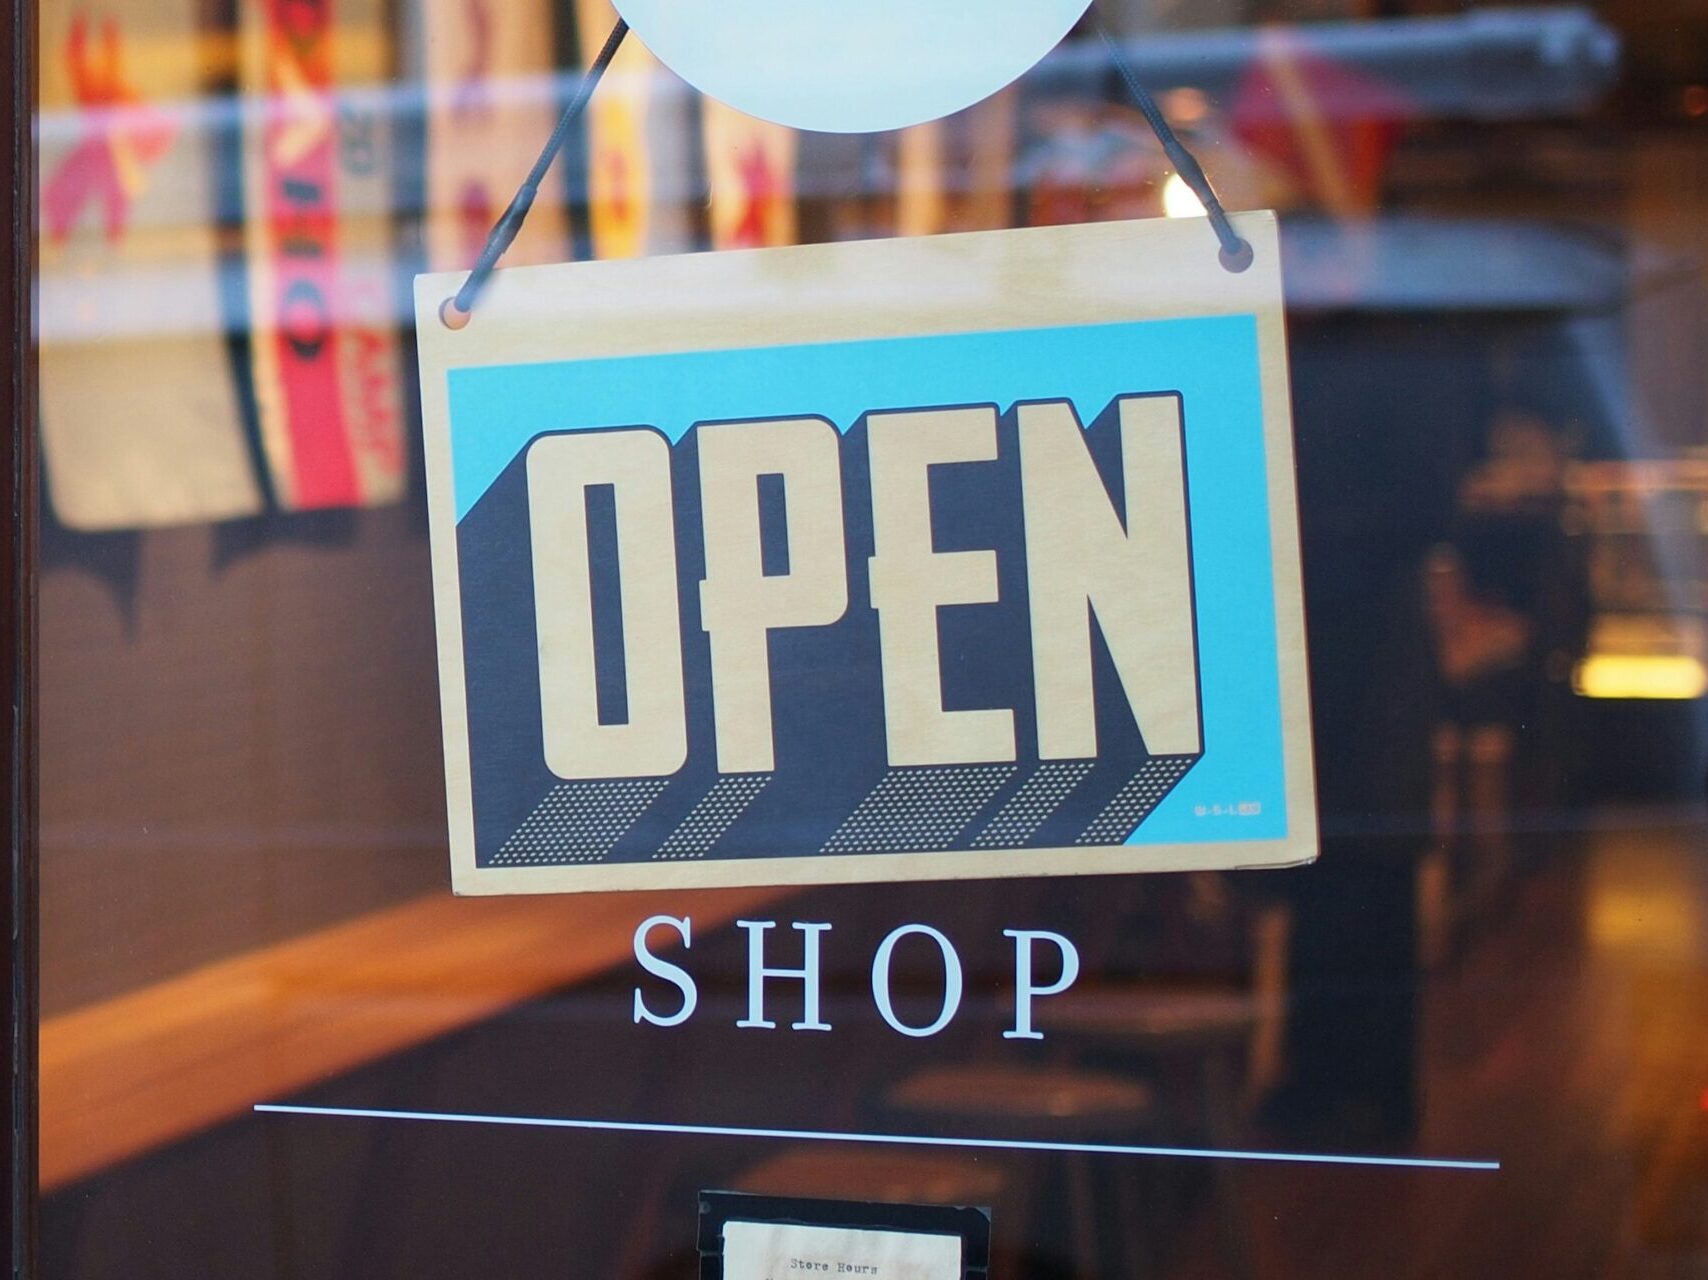 "OPEN" sign showing on clear business door with the word "shop" underneath